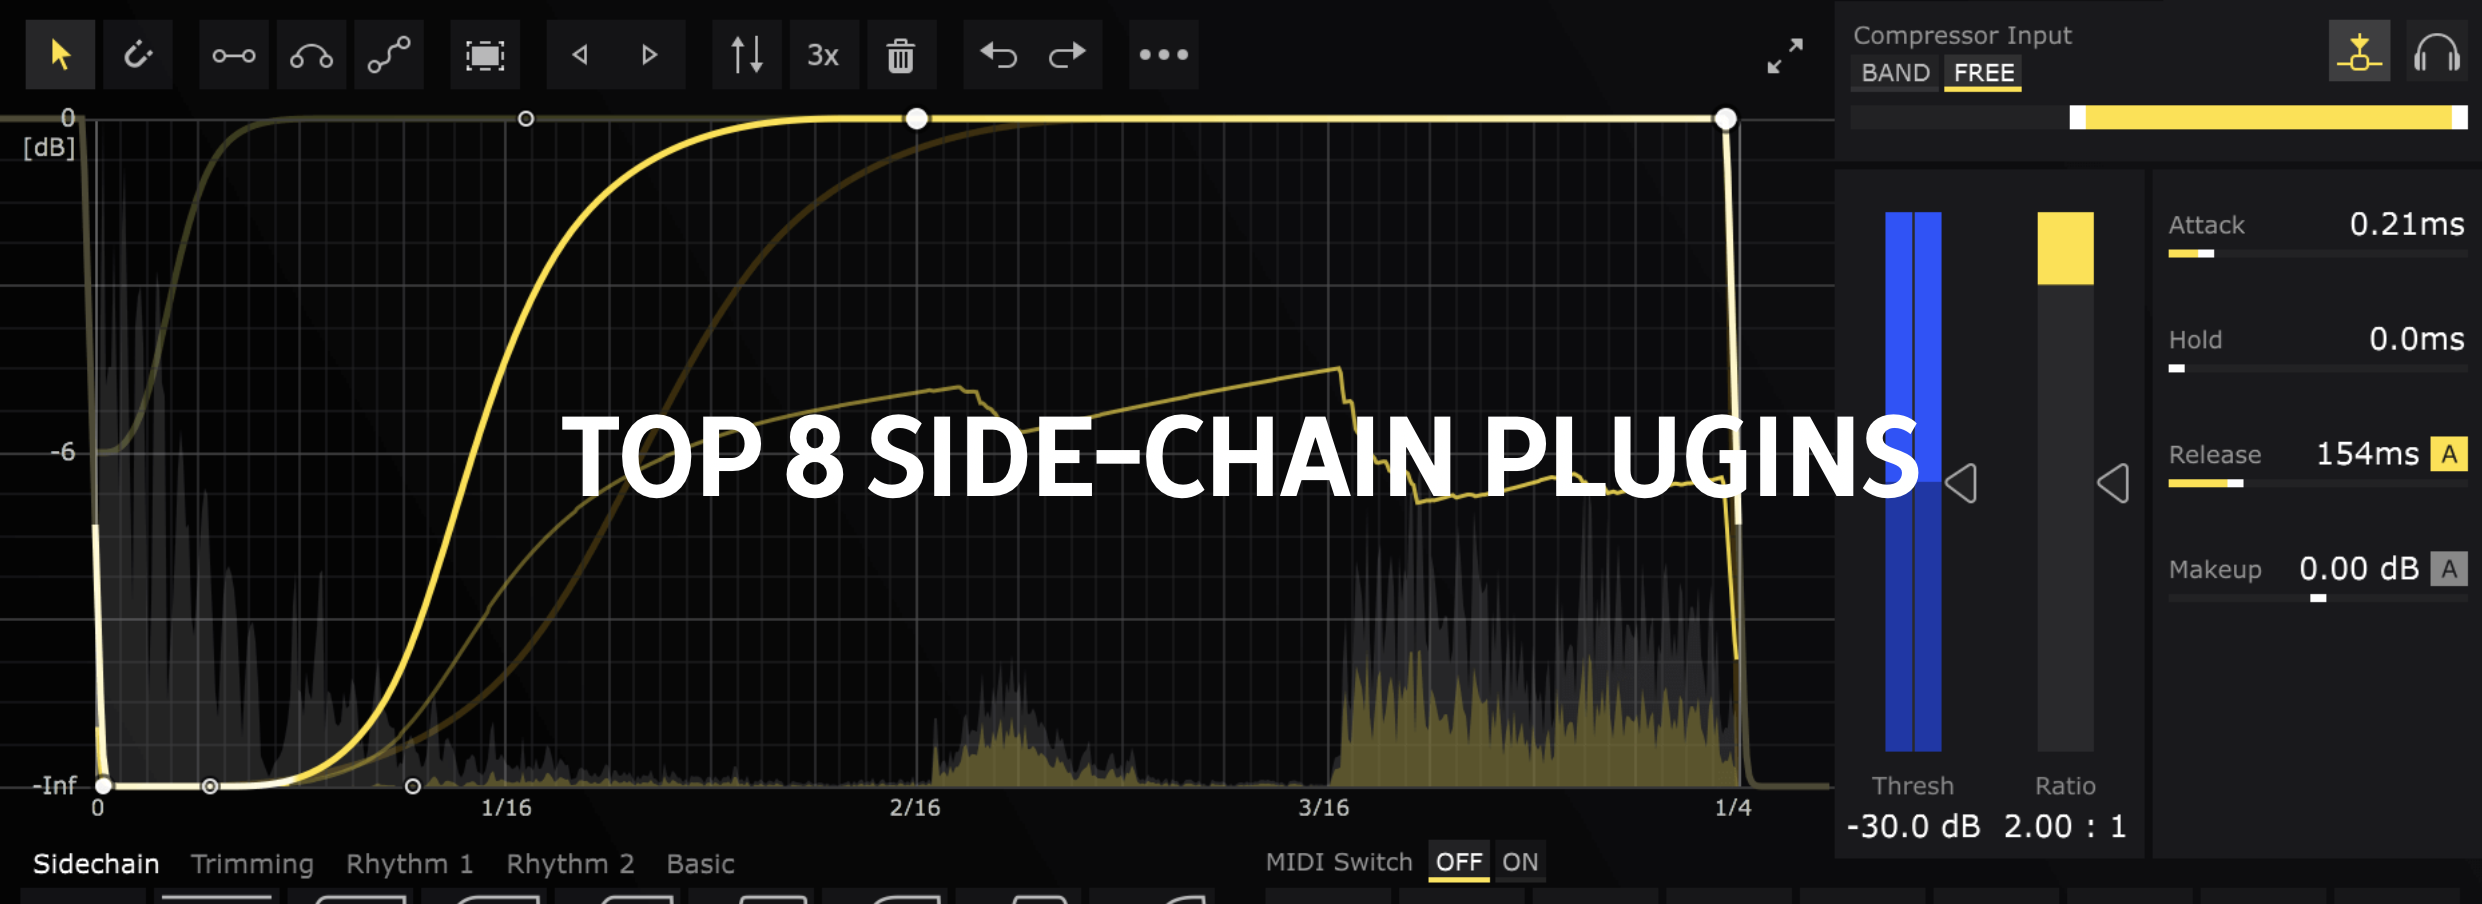 Top 8 Side-Chain Plugins || Sample Tools by Cr2 || BLOG